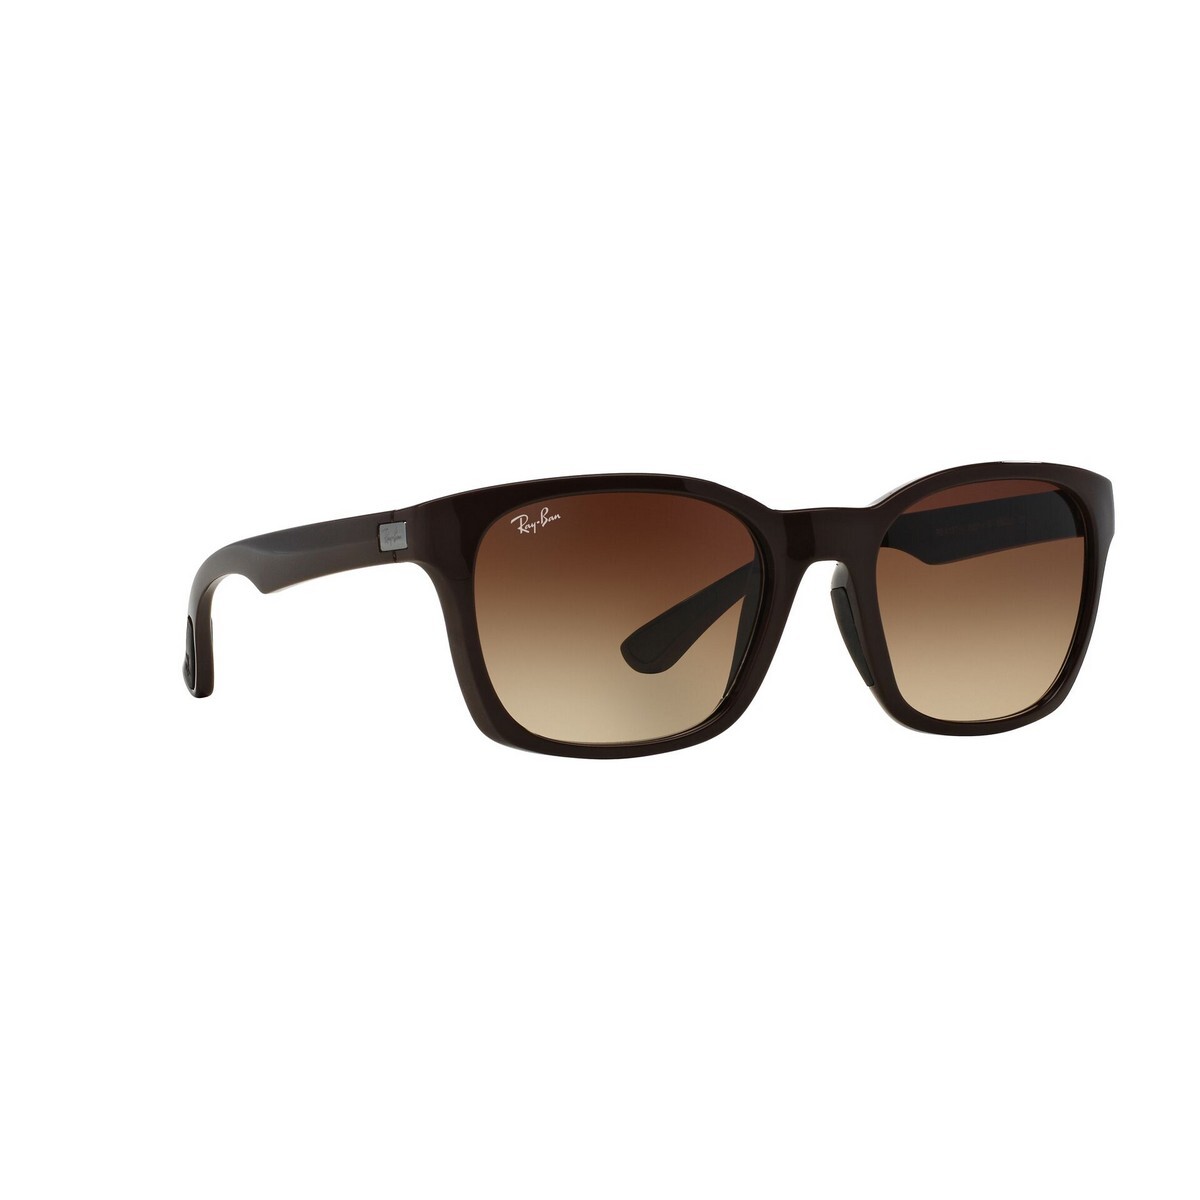 Rayban Mens Brown Frame With Brown Gradient Lens Sunglass